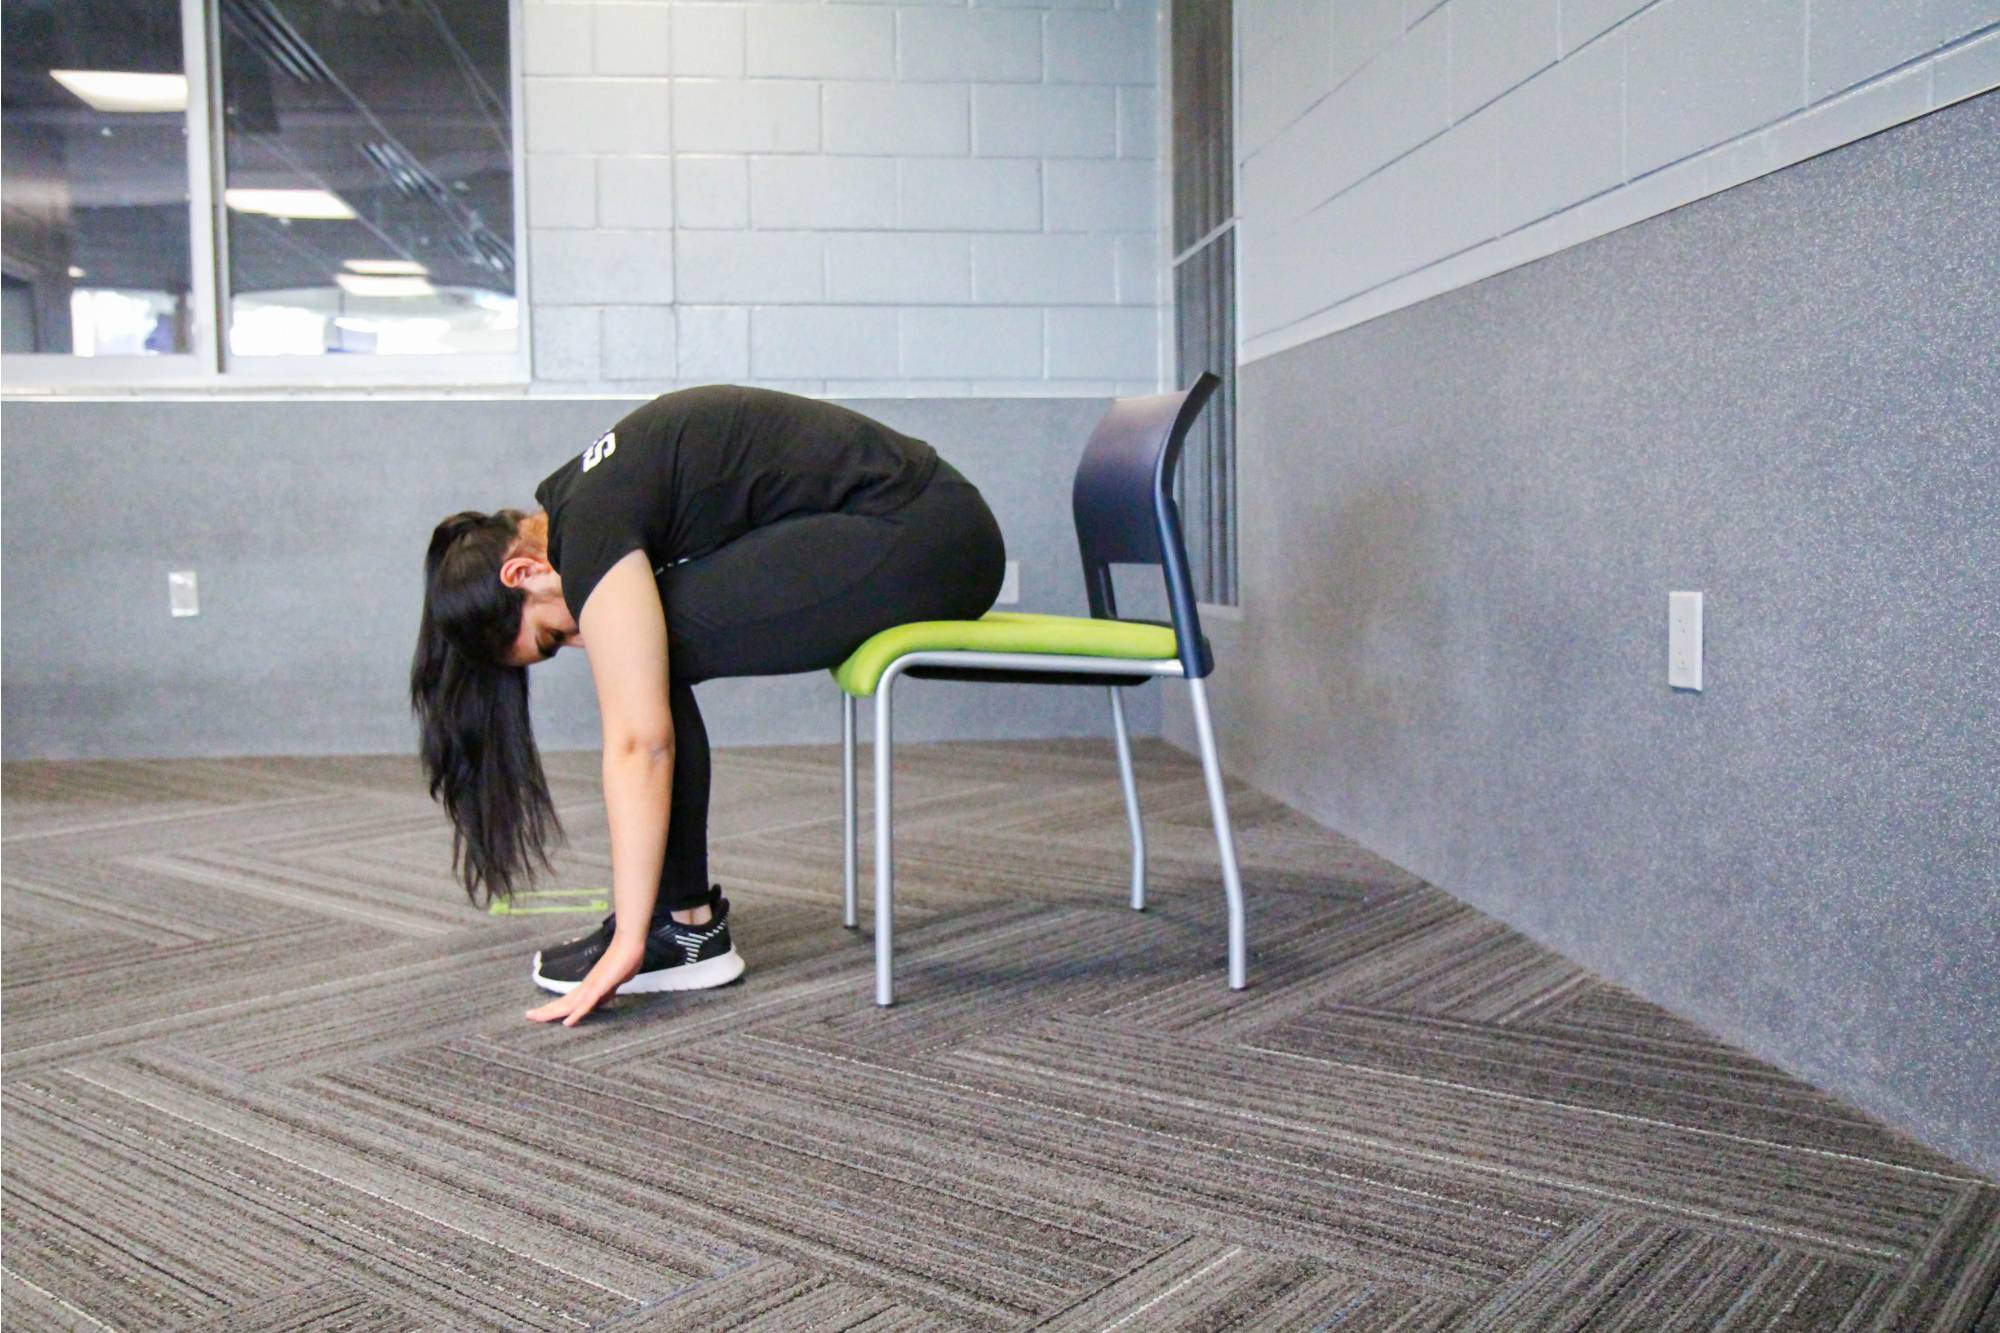 Seated Stretching - Forward Bend